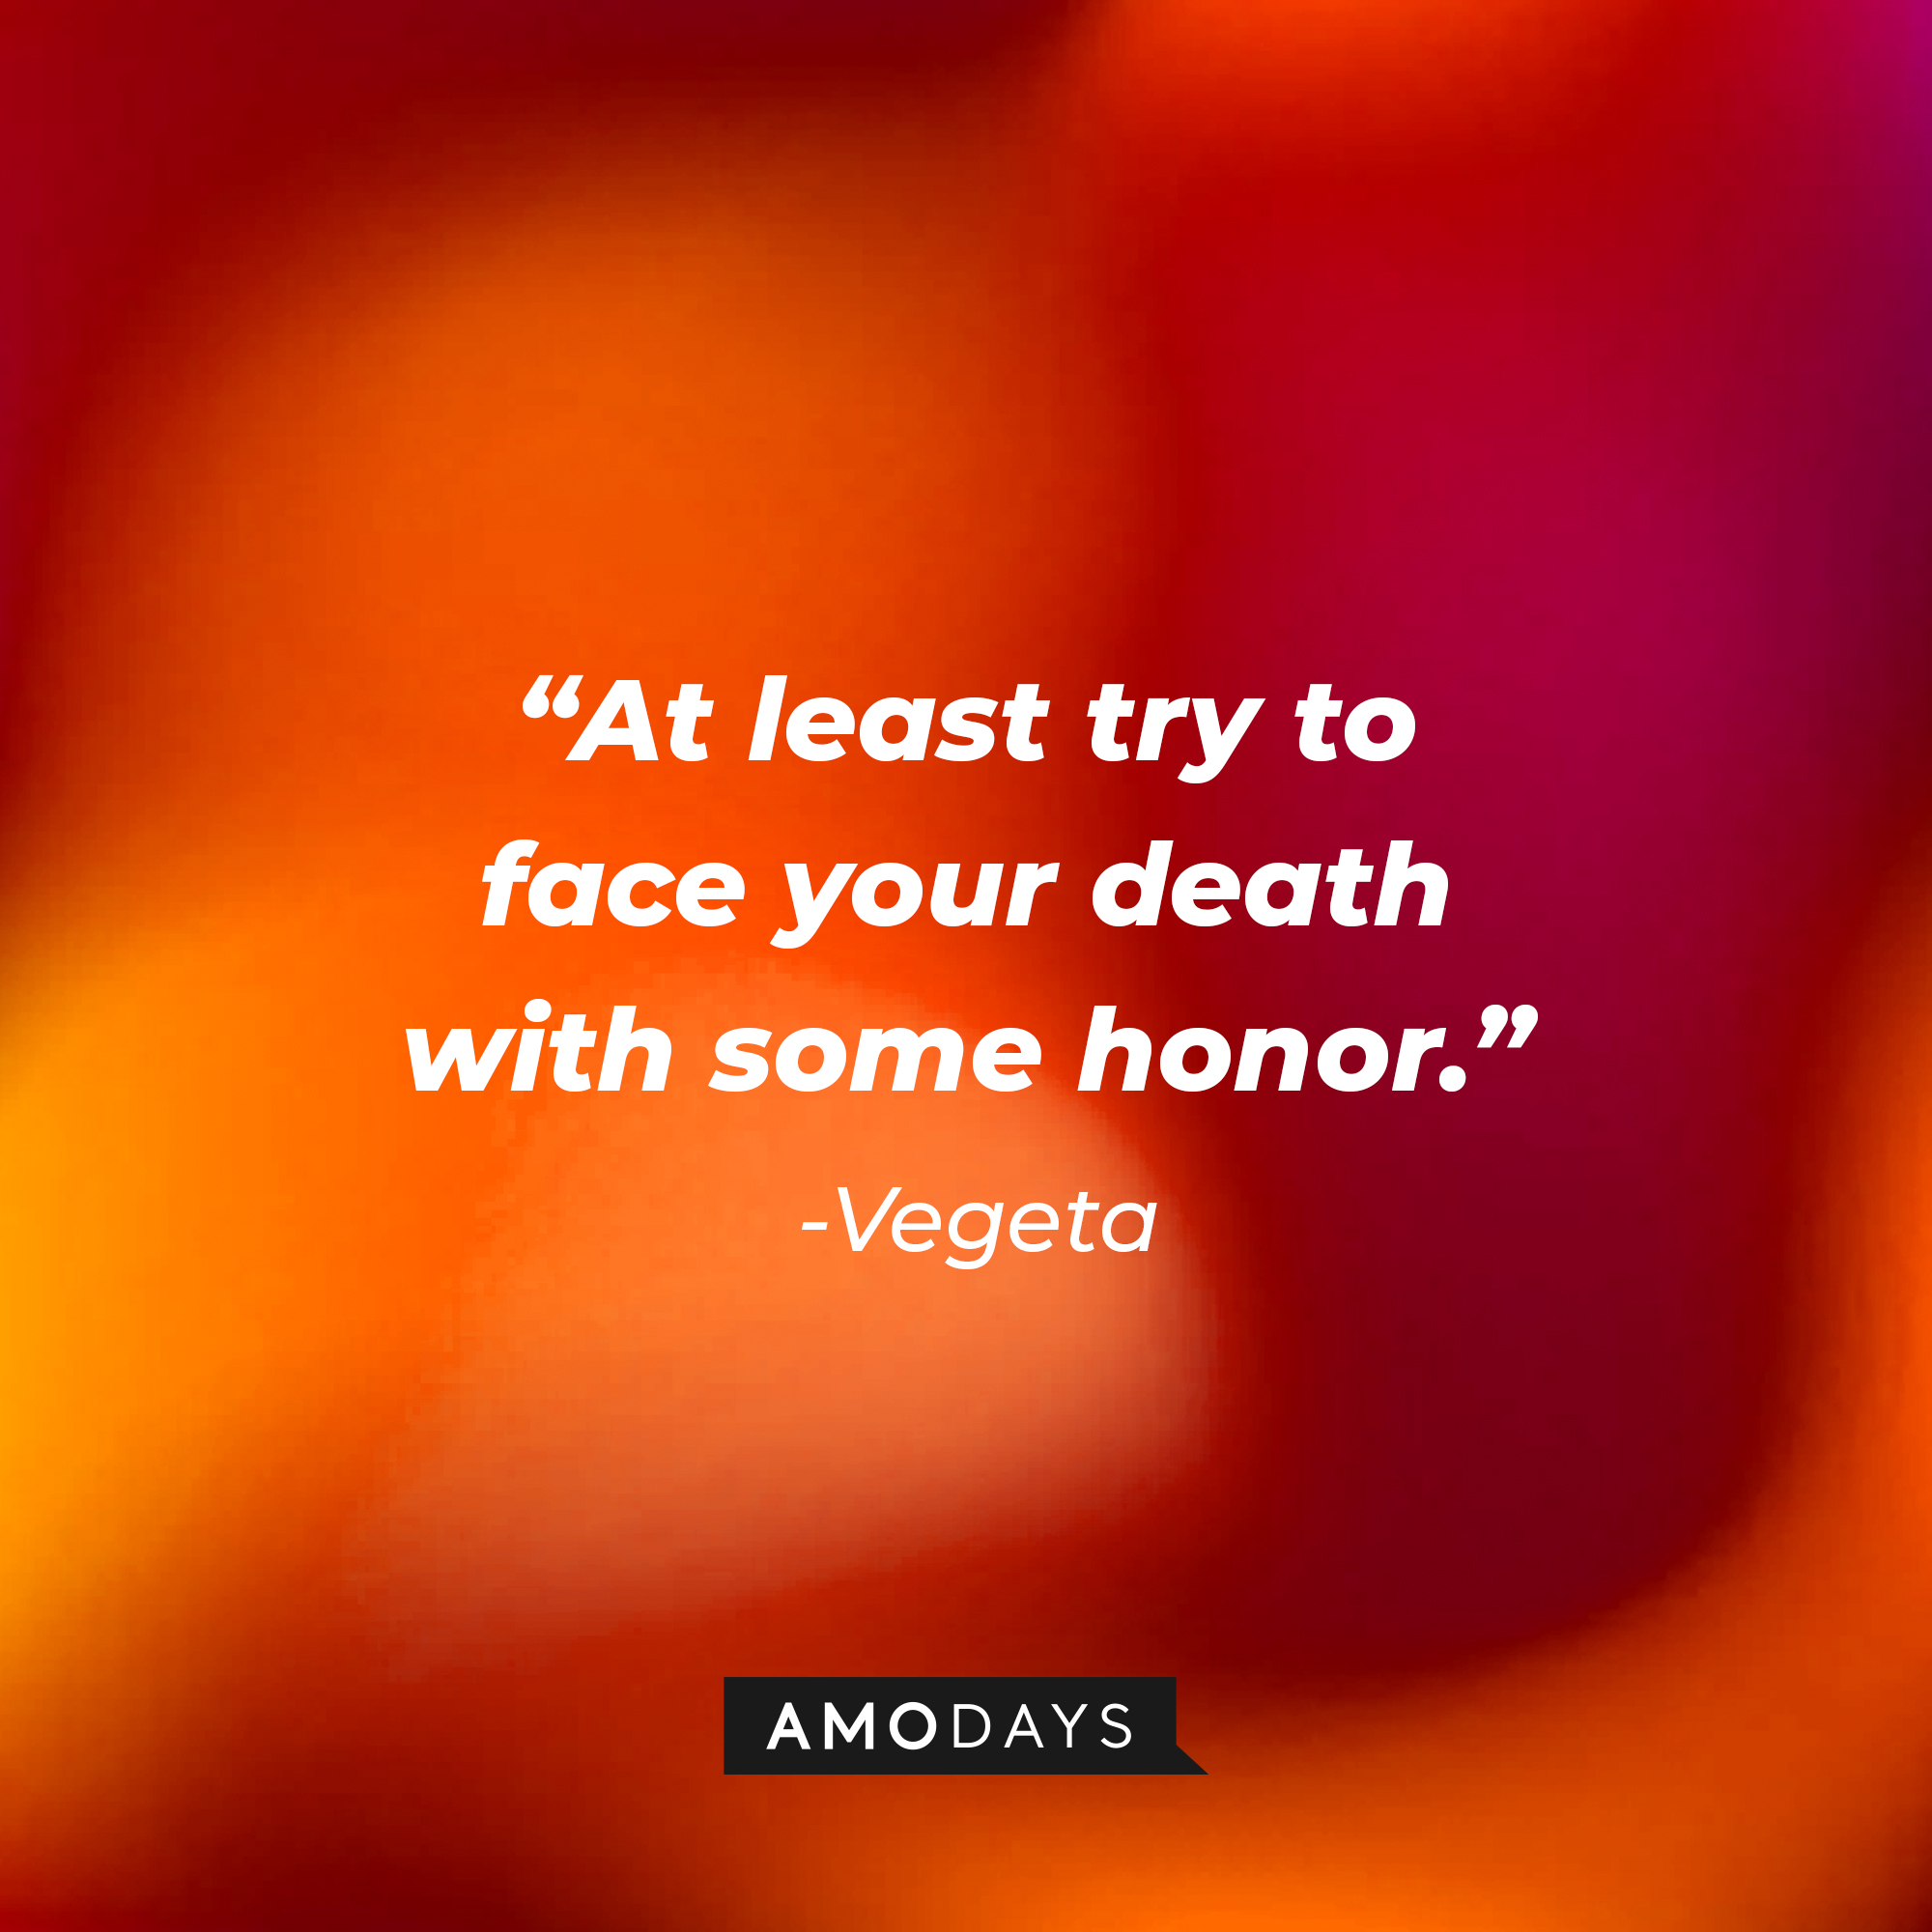 Vegeta’s quote:  “At least try to face your death with some honor.”  | Source: AmoDays